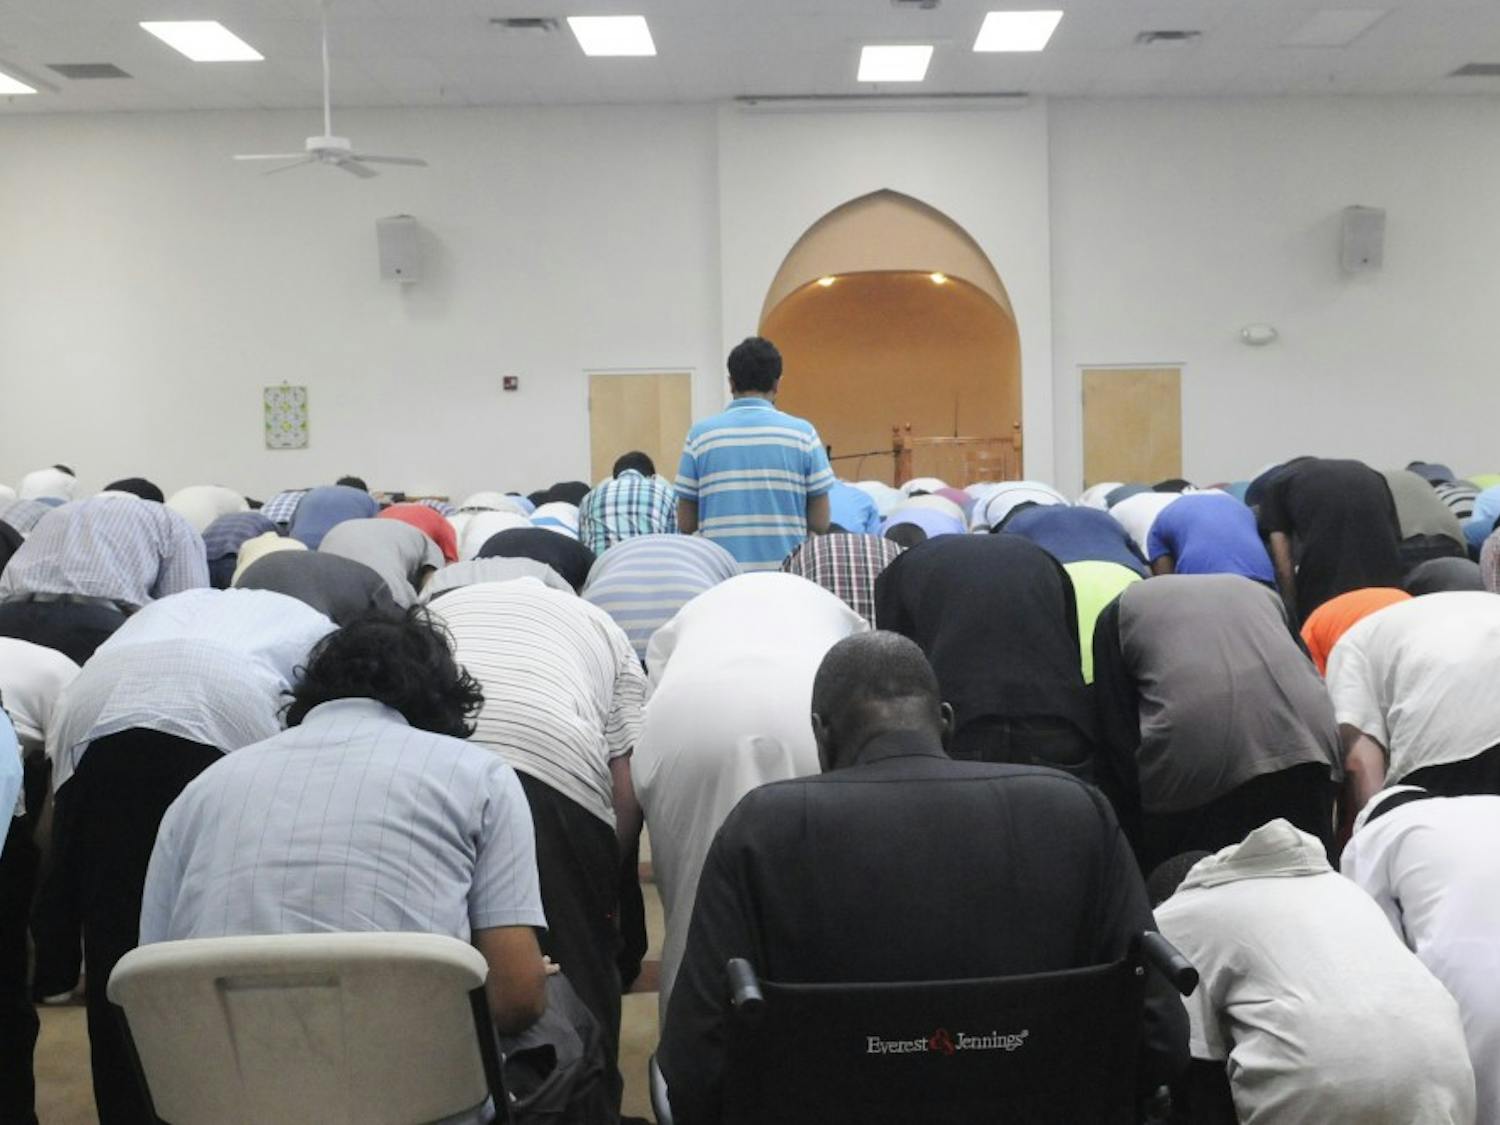 Muslim citizens pray during Praying Session on Friday afternoon in the Albuquerque Islamic Center. Muslims around the world are celebrating the holy month of Ramadan until July 17. 